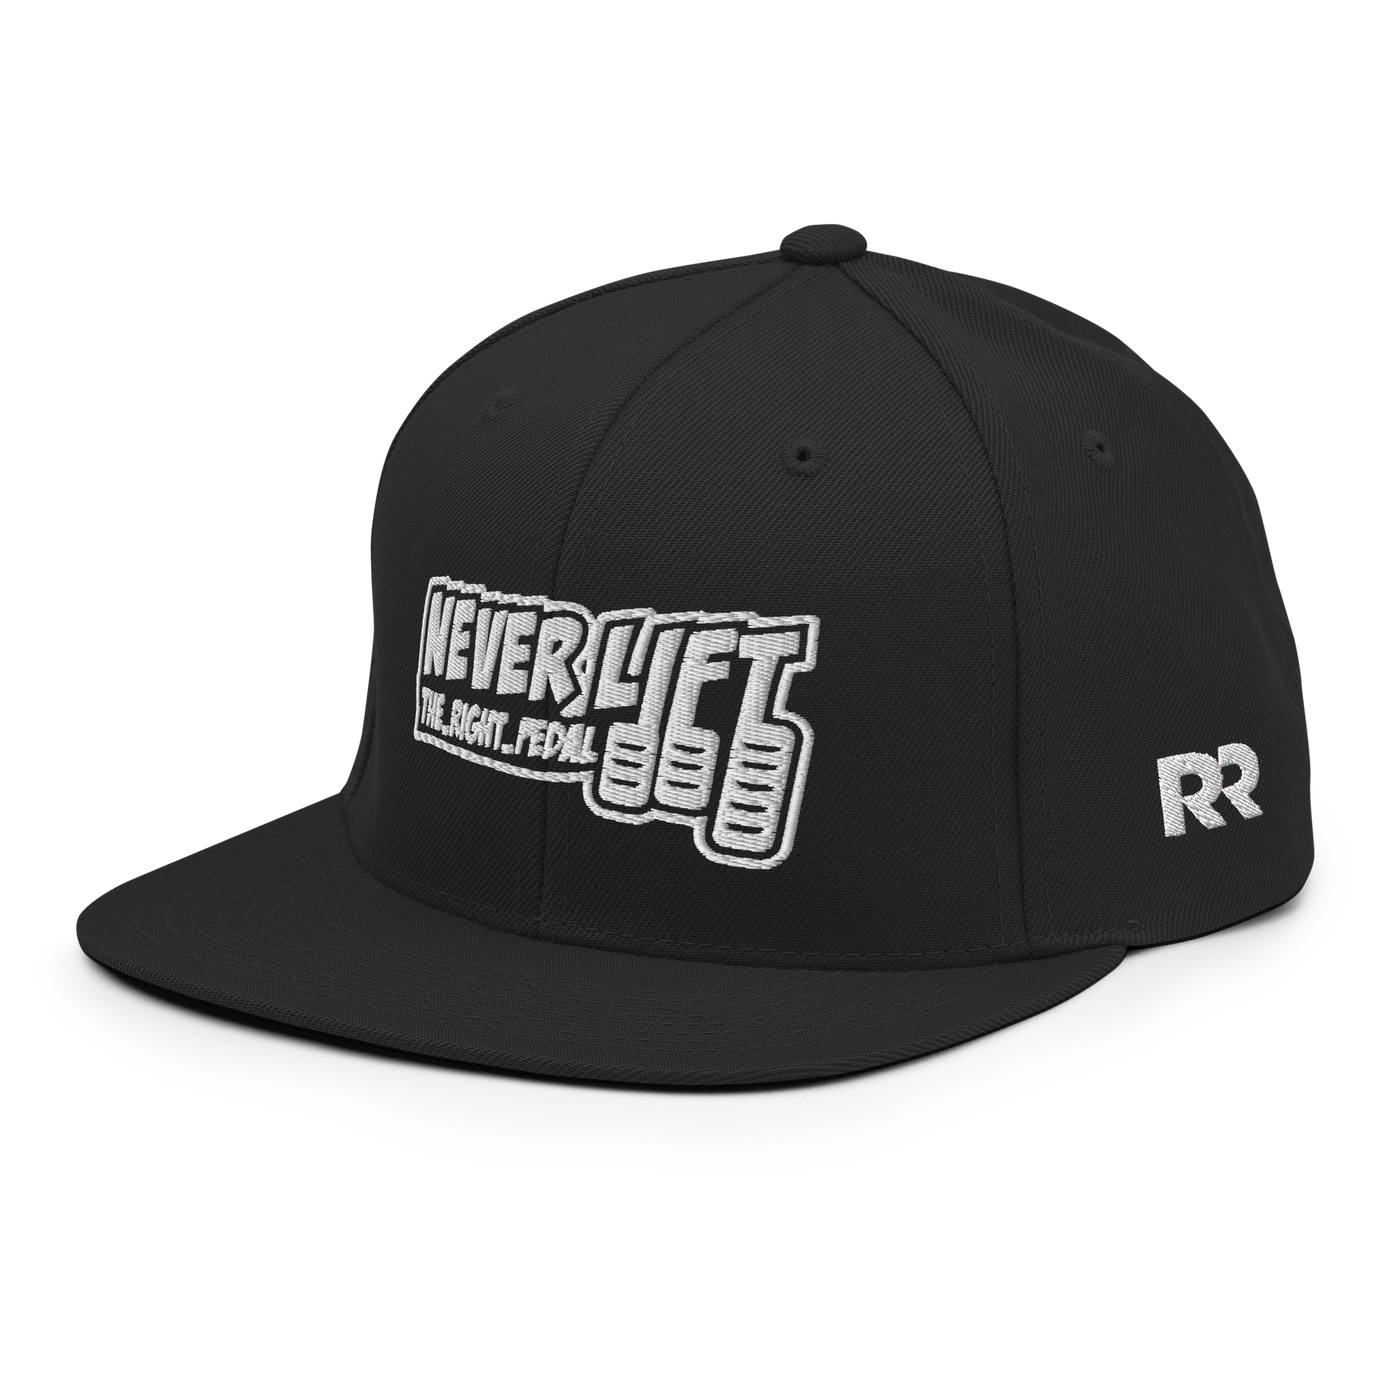 The Right Pedal x Rally Ready "Co-Driver Kid" Snapback Hat